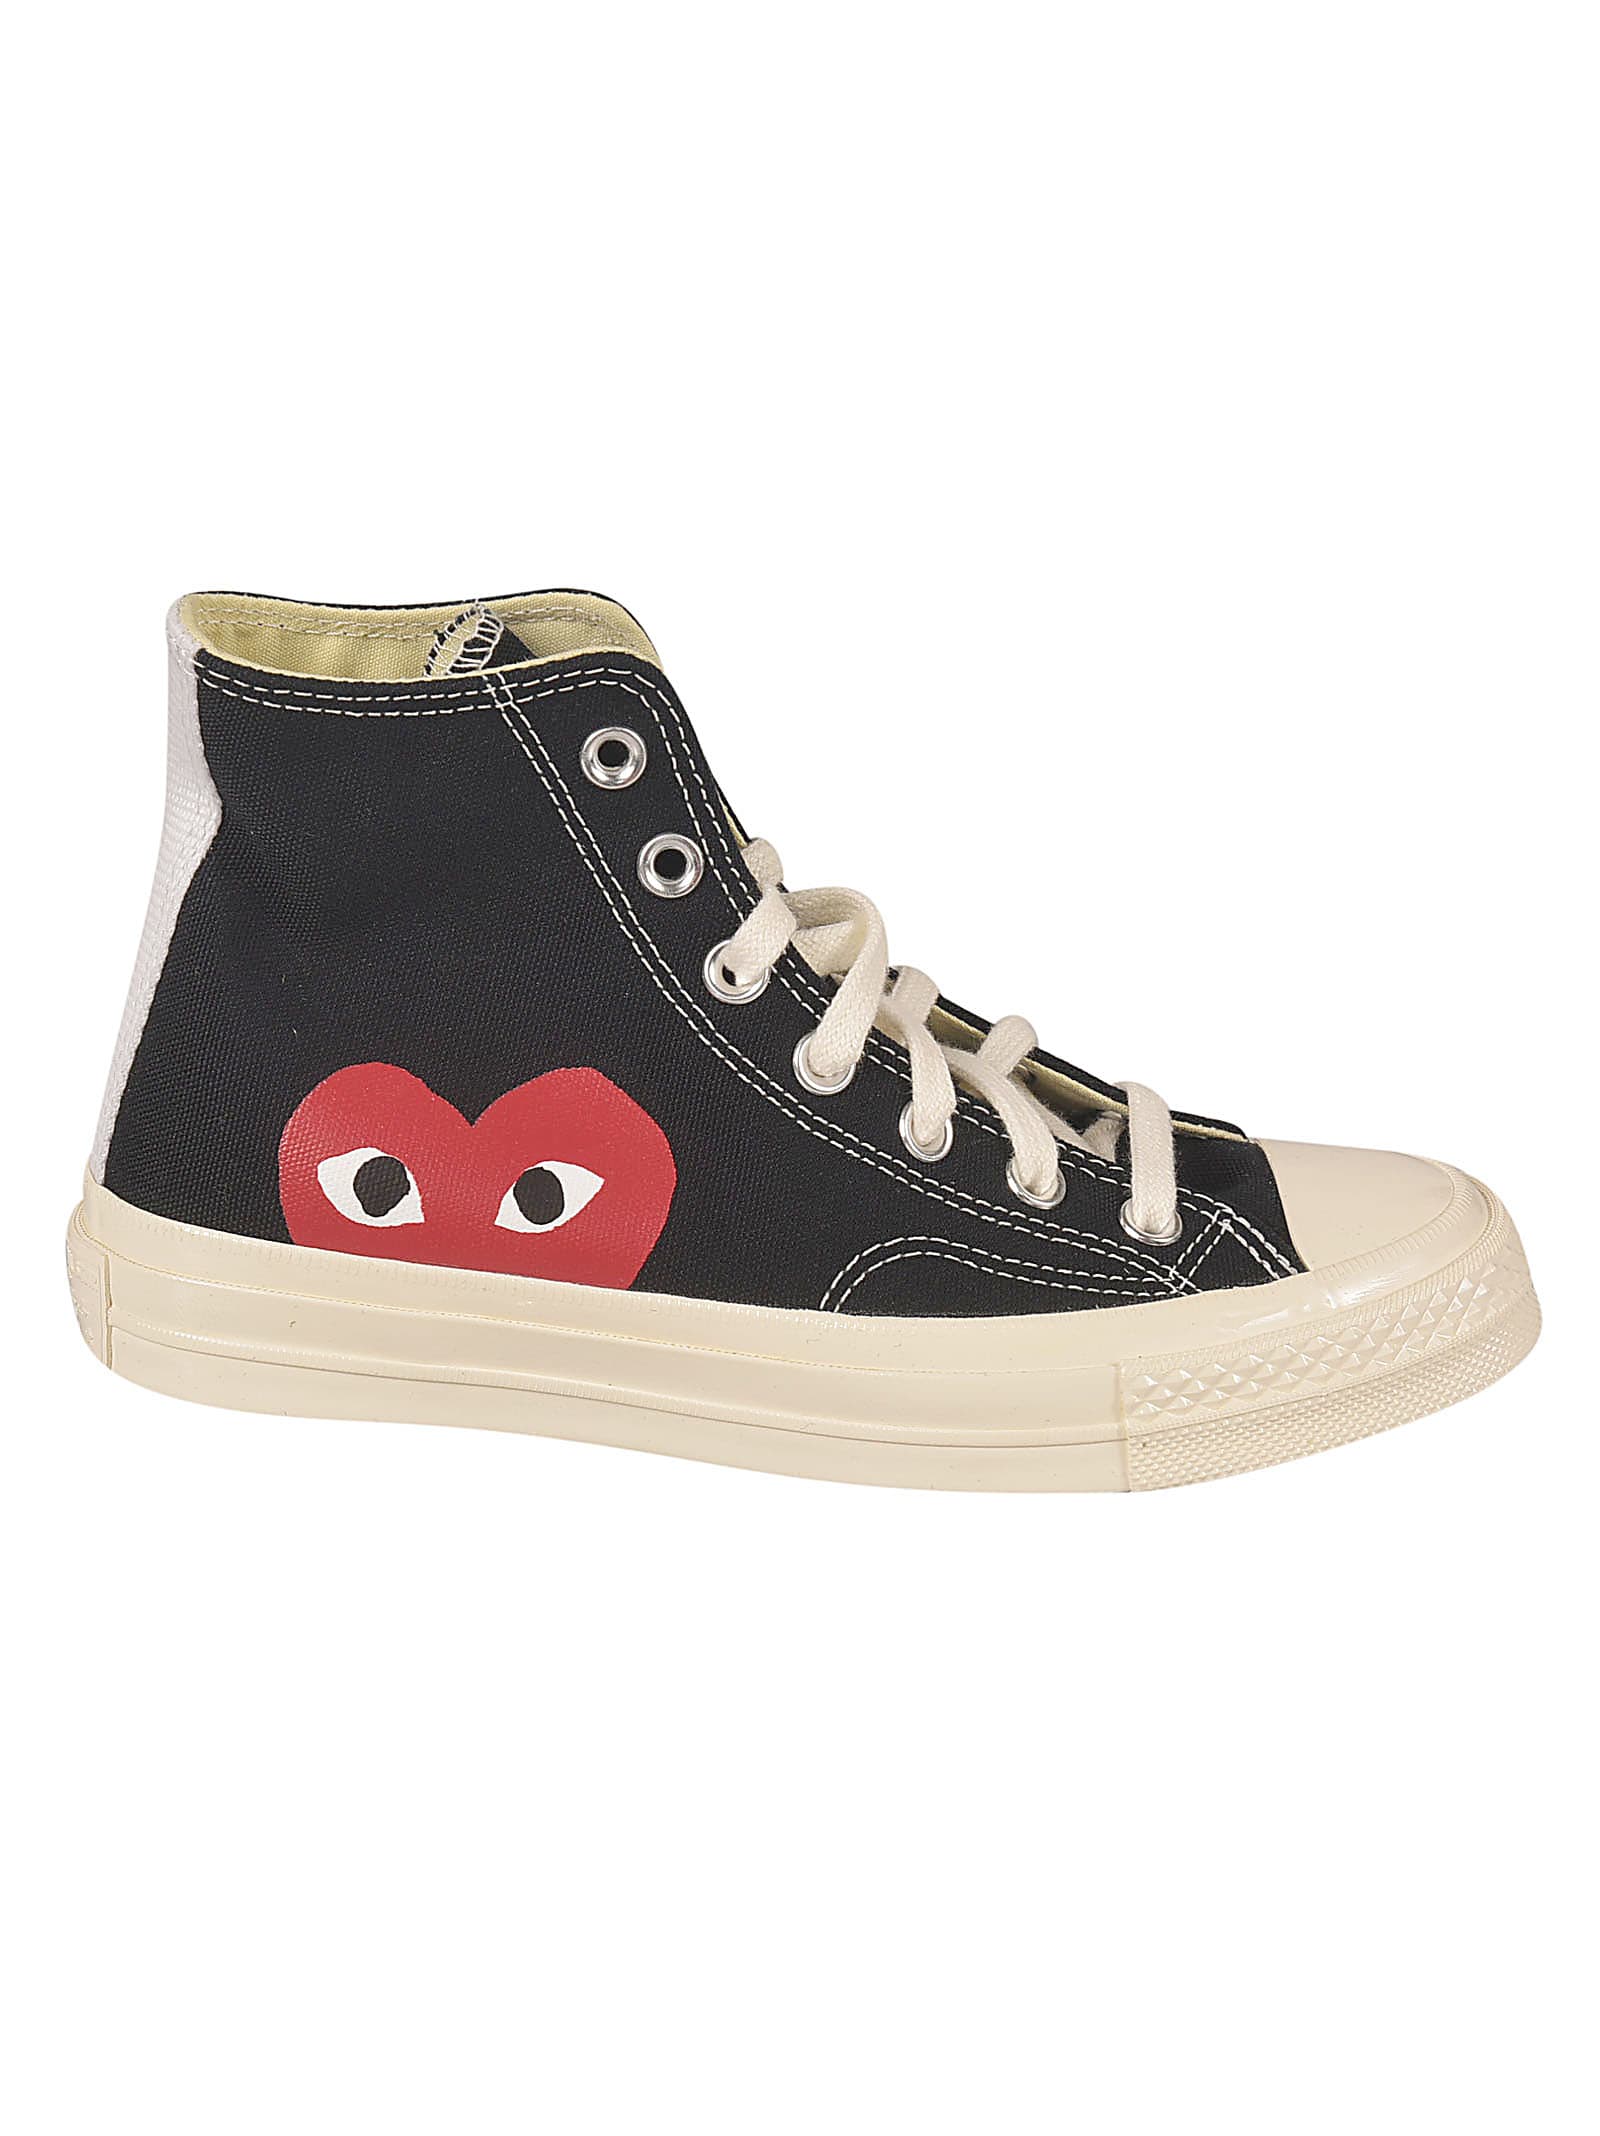 Comme des Garçons Play High-top Logo Patched Sneakers